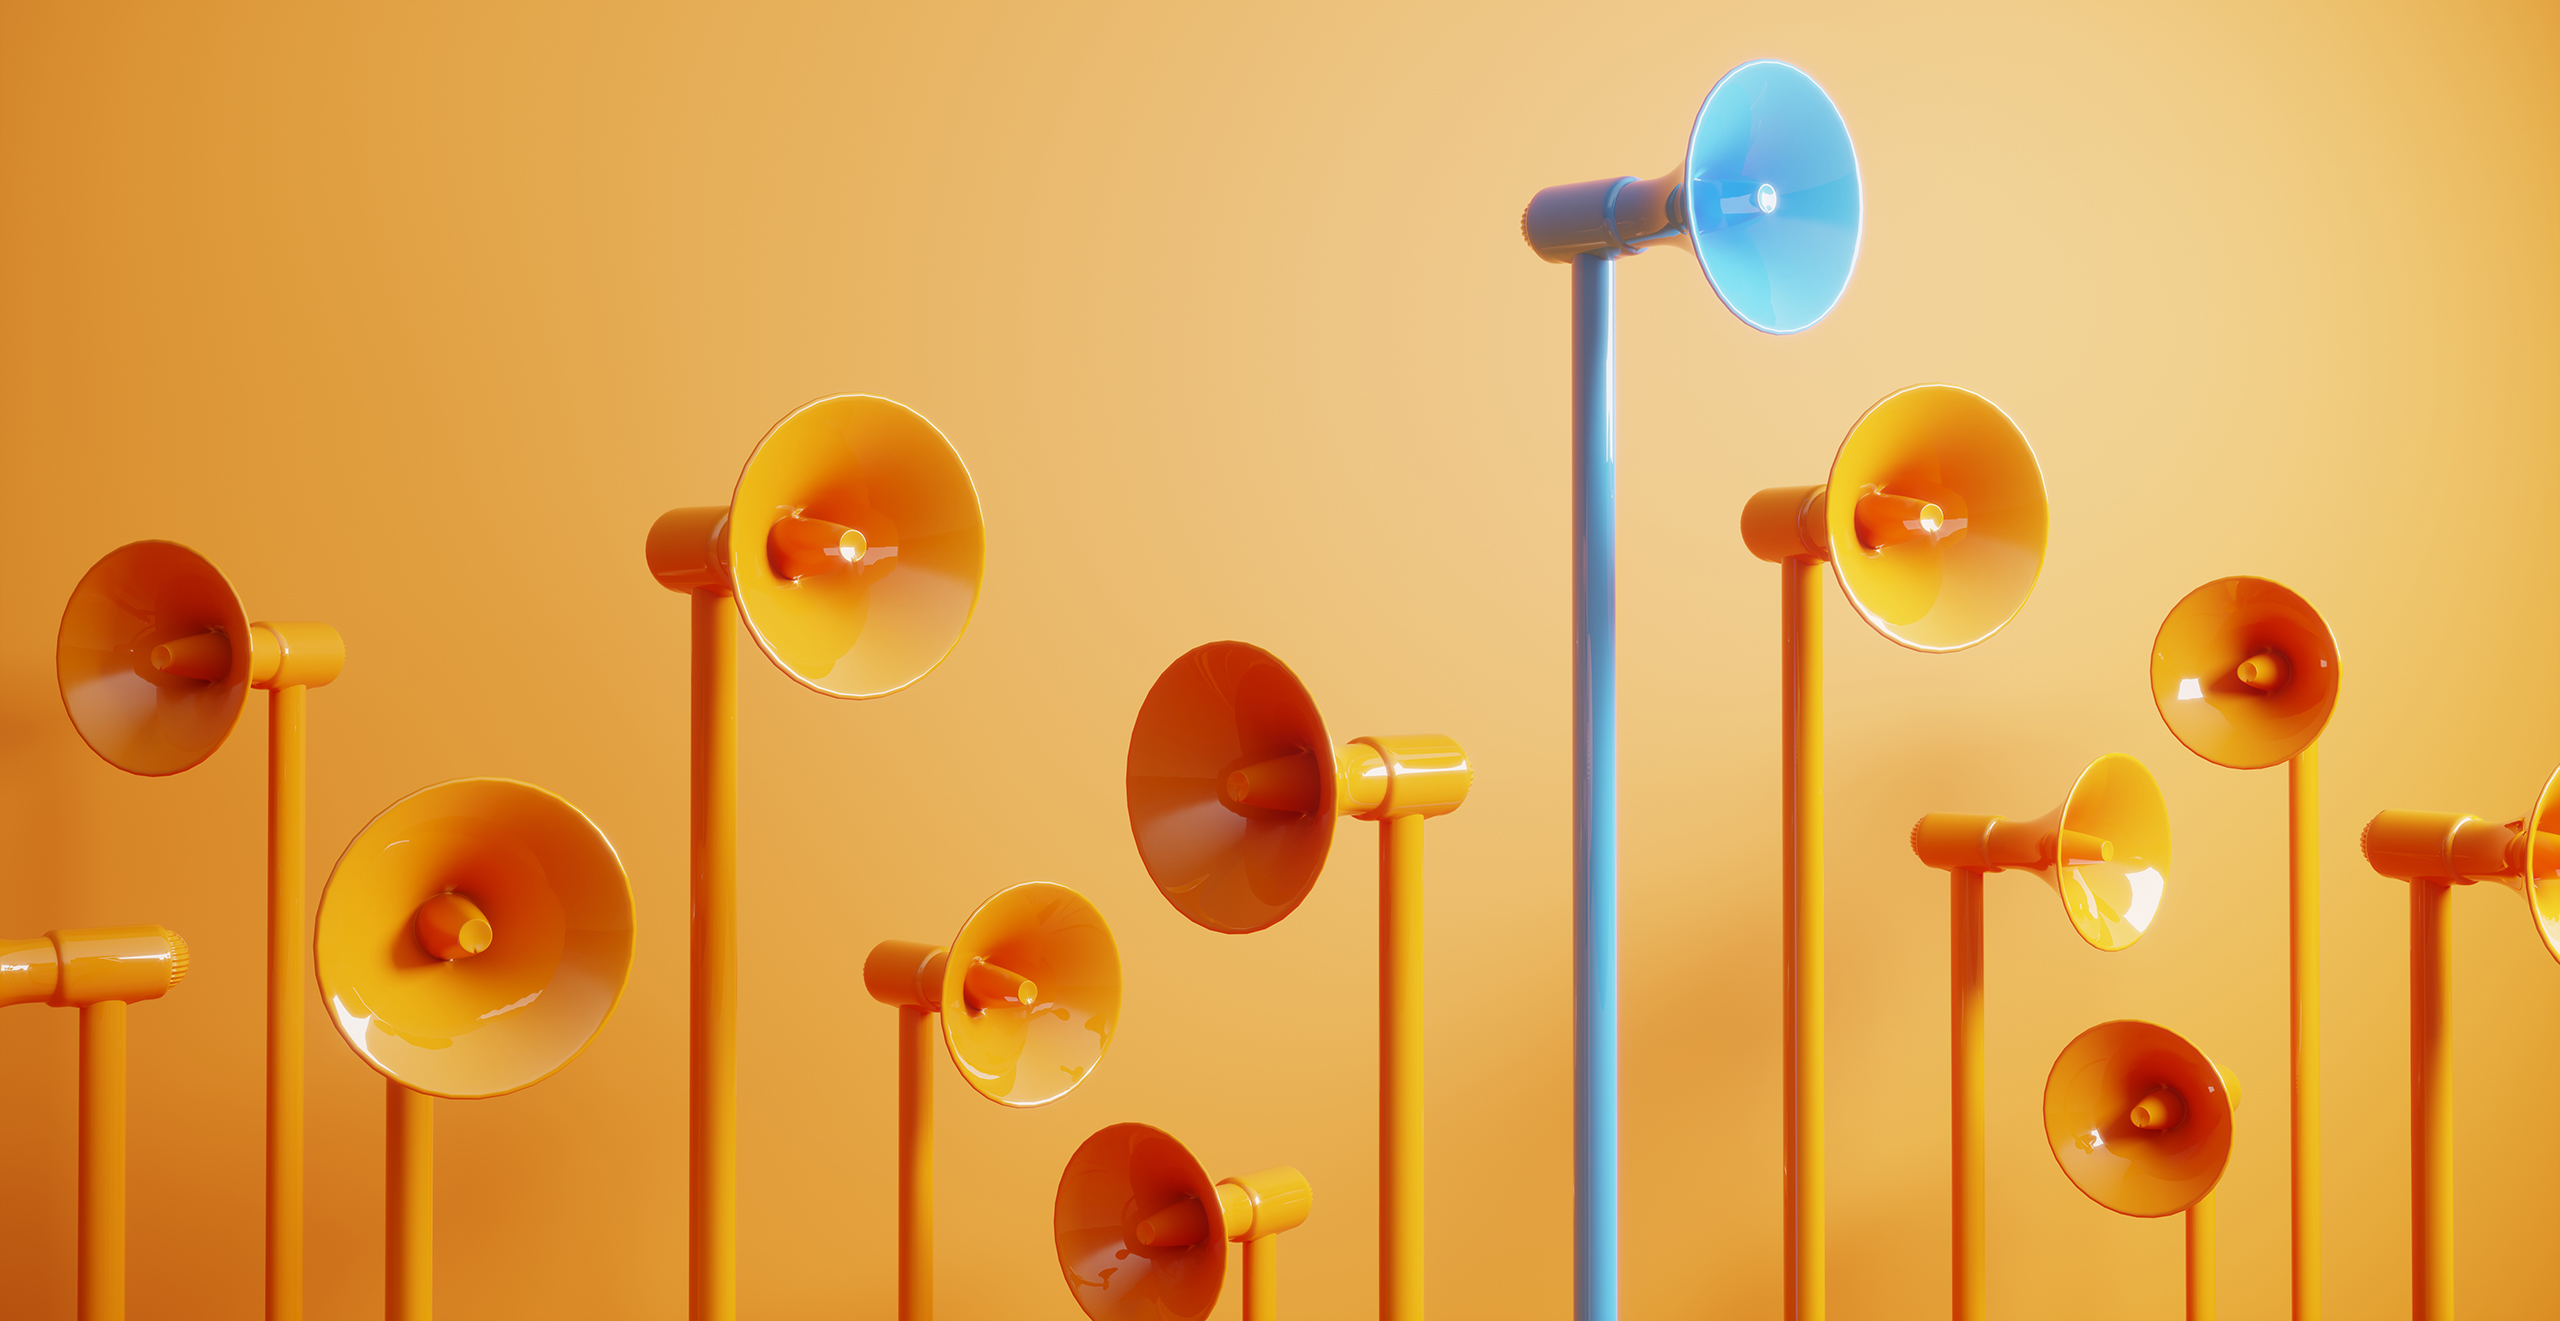 A group of megaphones, all bright orange, with one towering megaphone standing out in bright blue, representing telling a smarter story to maximize fundraising.